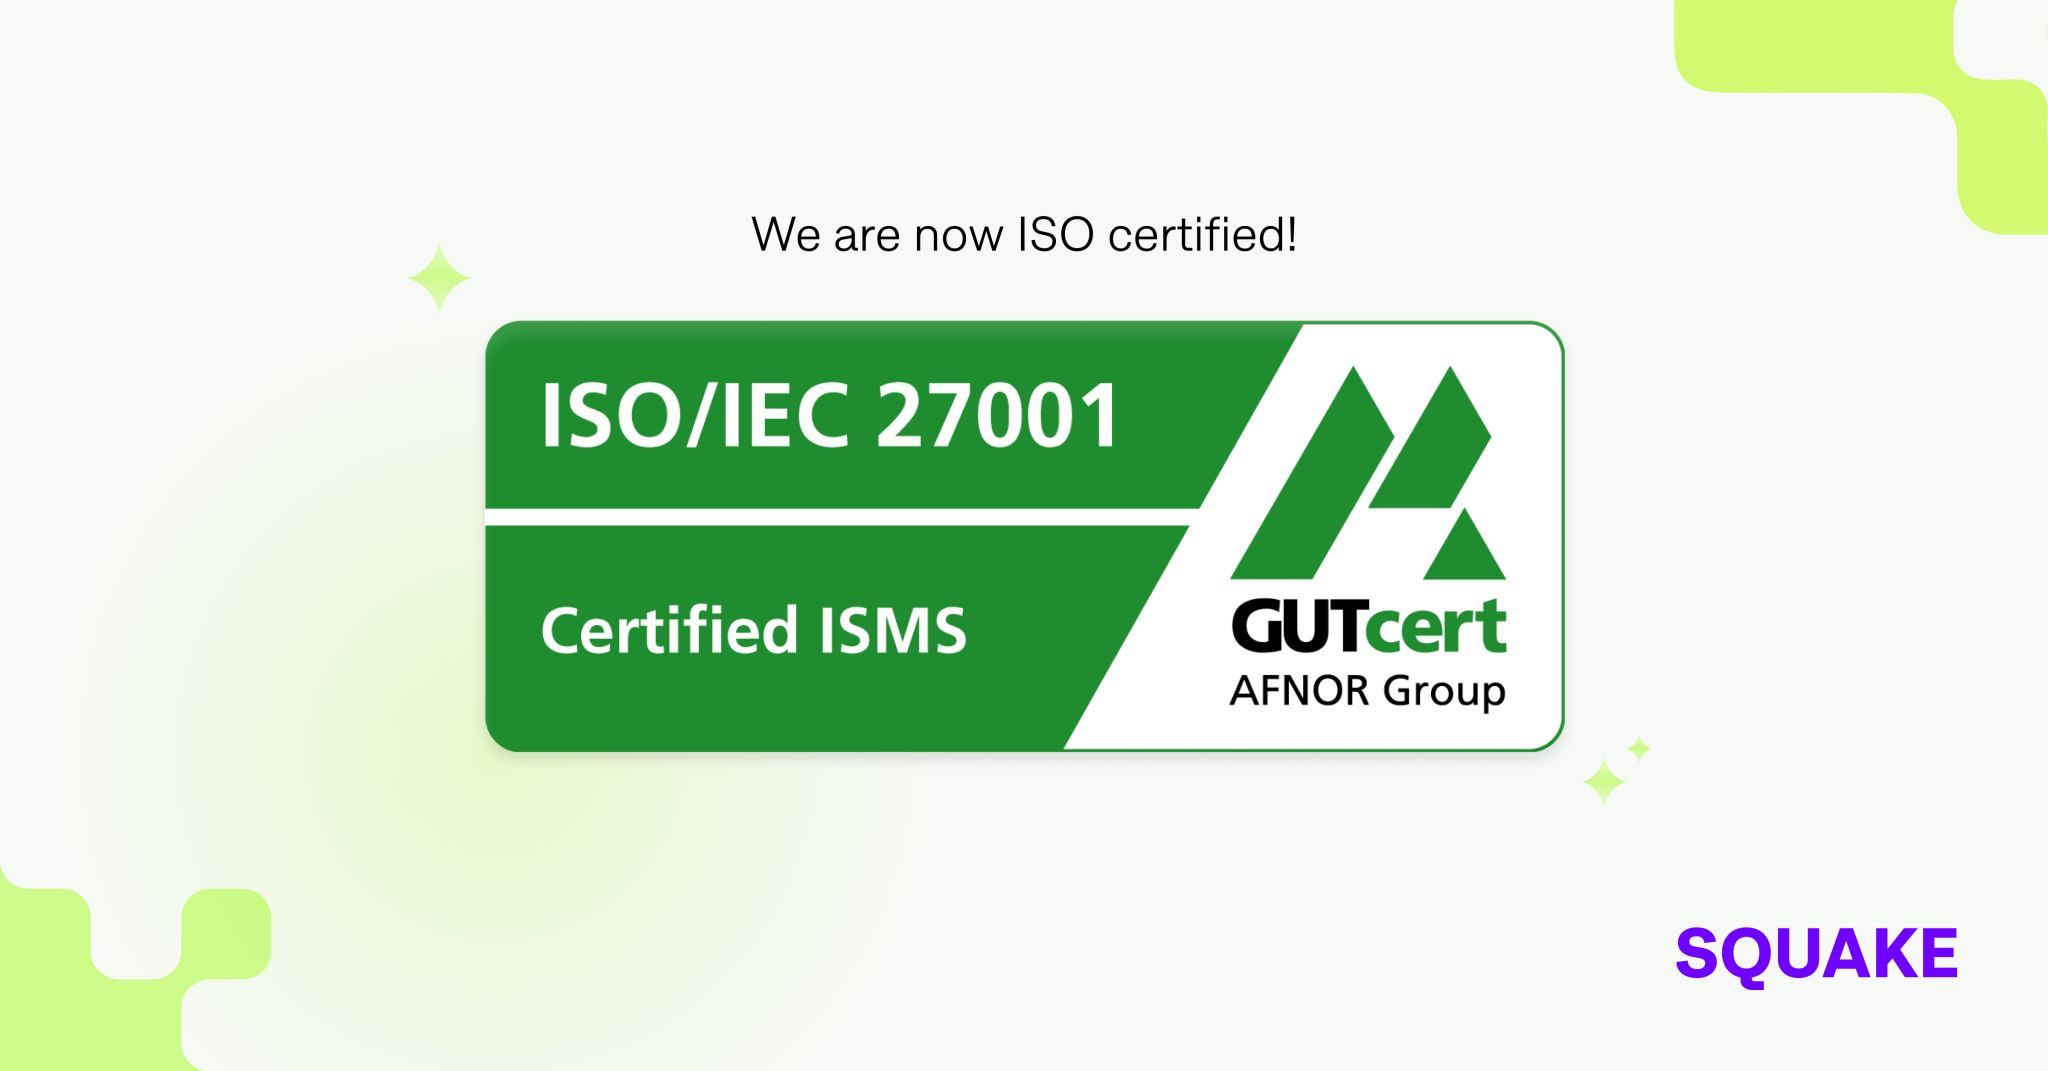 SQUAKE is now ISO 27001 certified